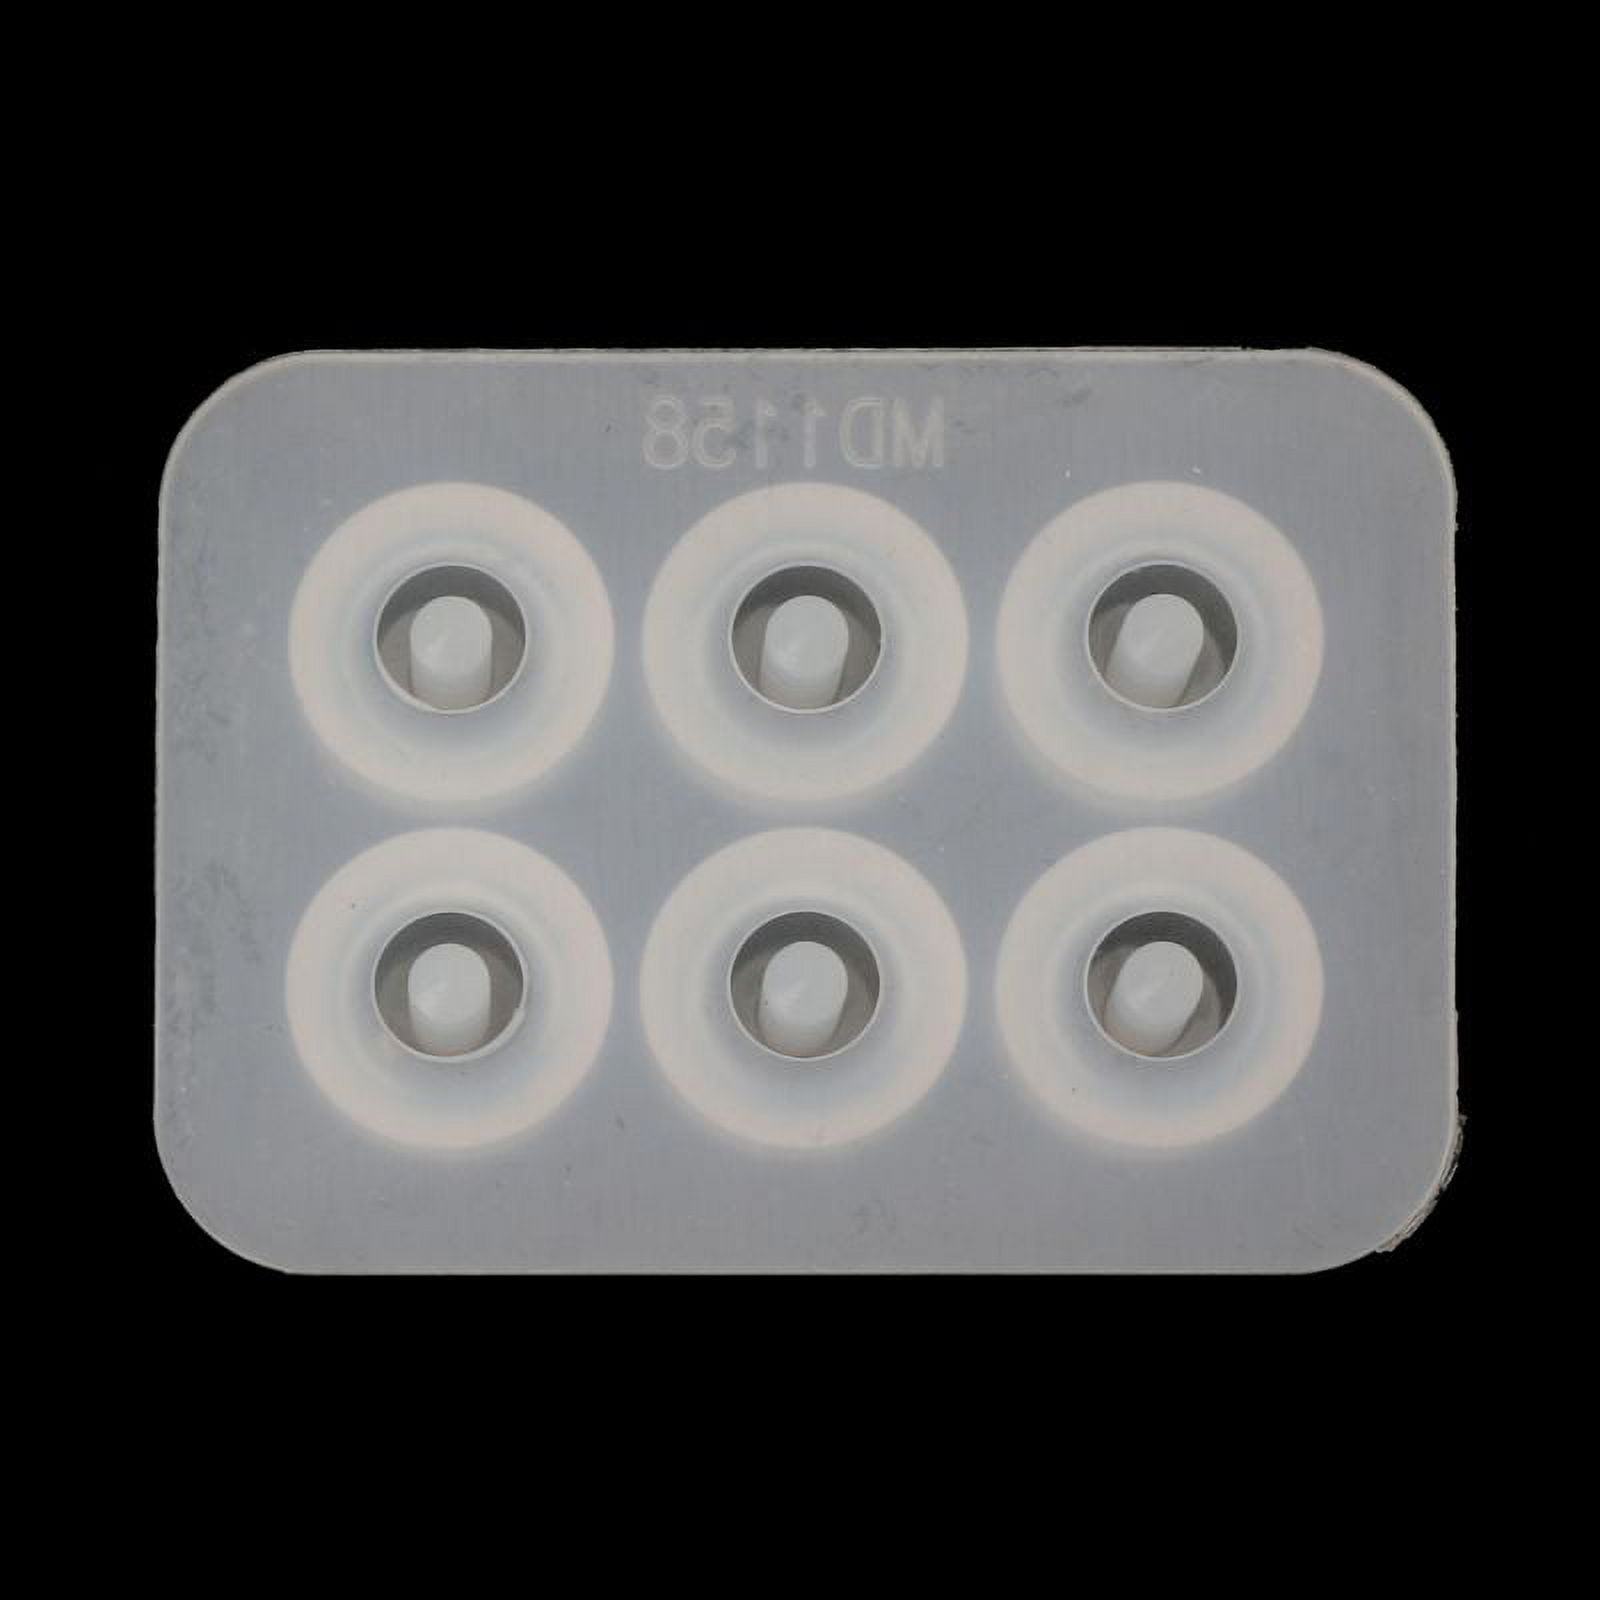 ANHTCZYX Bracelet Bead Mold for Jewelry Making Flat Ball Beads with 5mm Hole Resin Mould, Women's, Size: 1, White